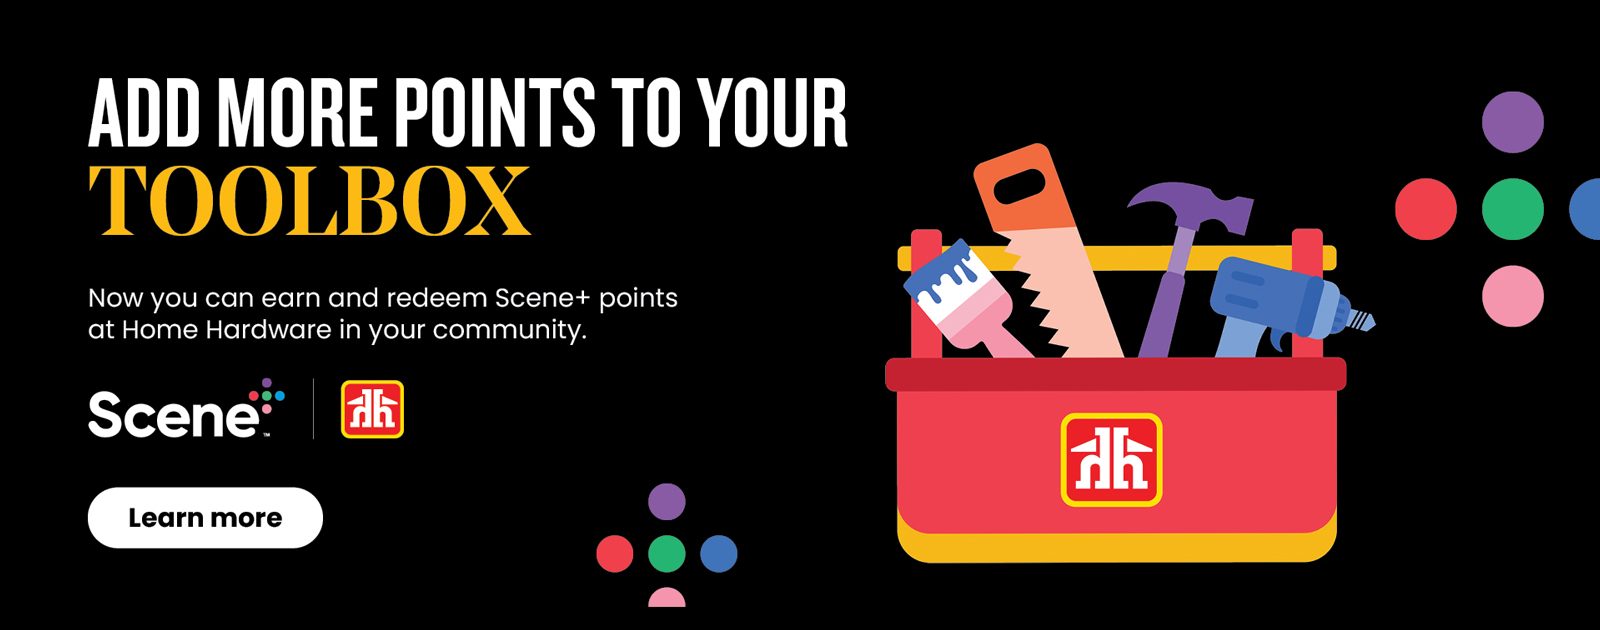 Now you can earn and redeem Scene+ points at Home Hardware